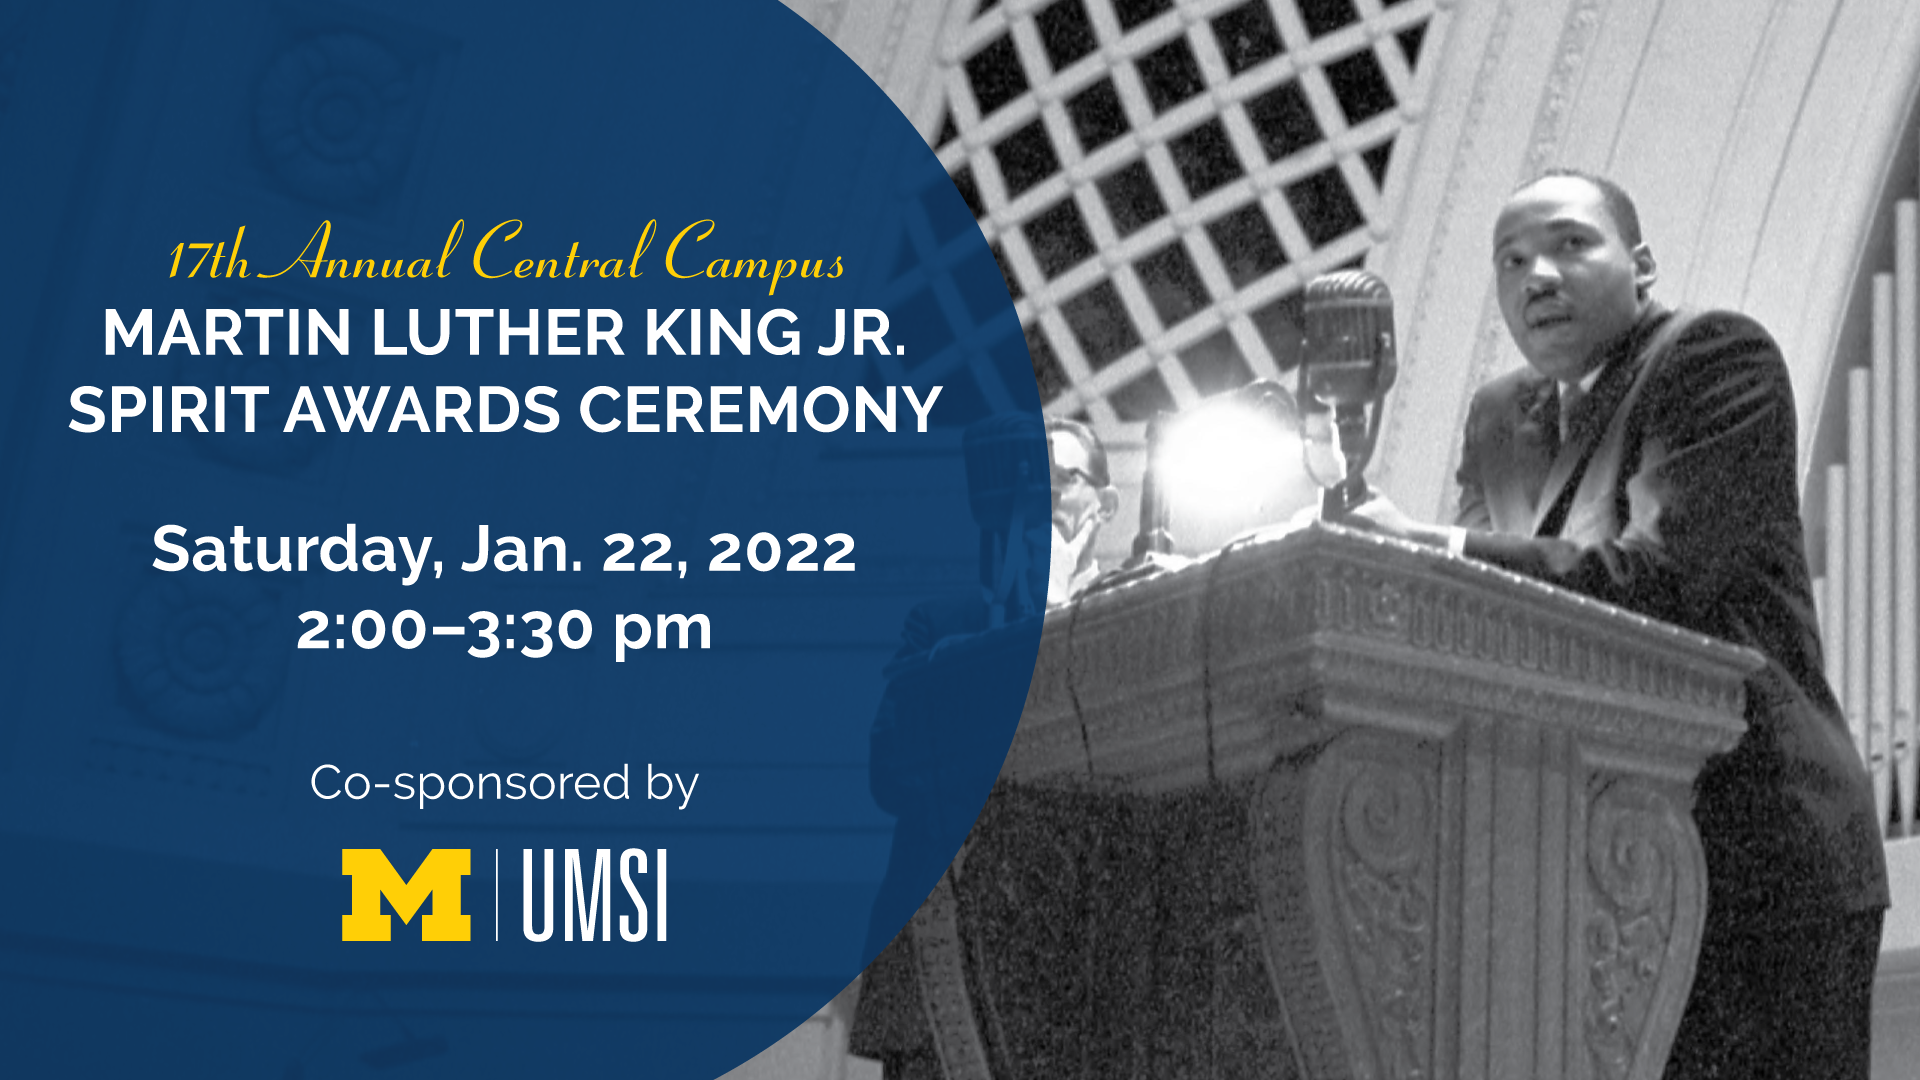 Monochrome image of Rev. Dr. Martin Luther King Jr. standing behind a podium with a microphone indoors. “17th Annual Central Campus Martin Luther King Jr. Spirit Awards Ceremony. Saturday, Jan. 22, 2022. 2-3:30 p.m. Co-sponsored by UMSI.”